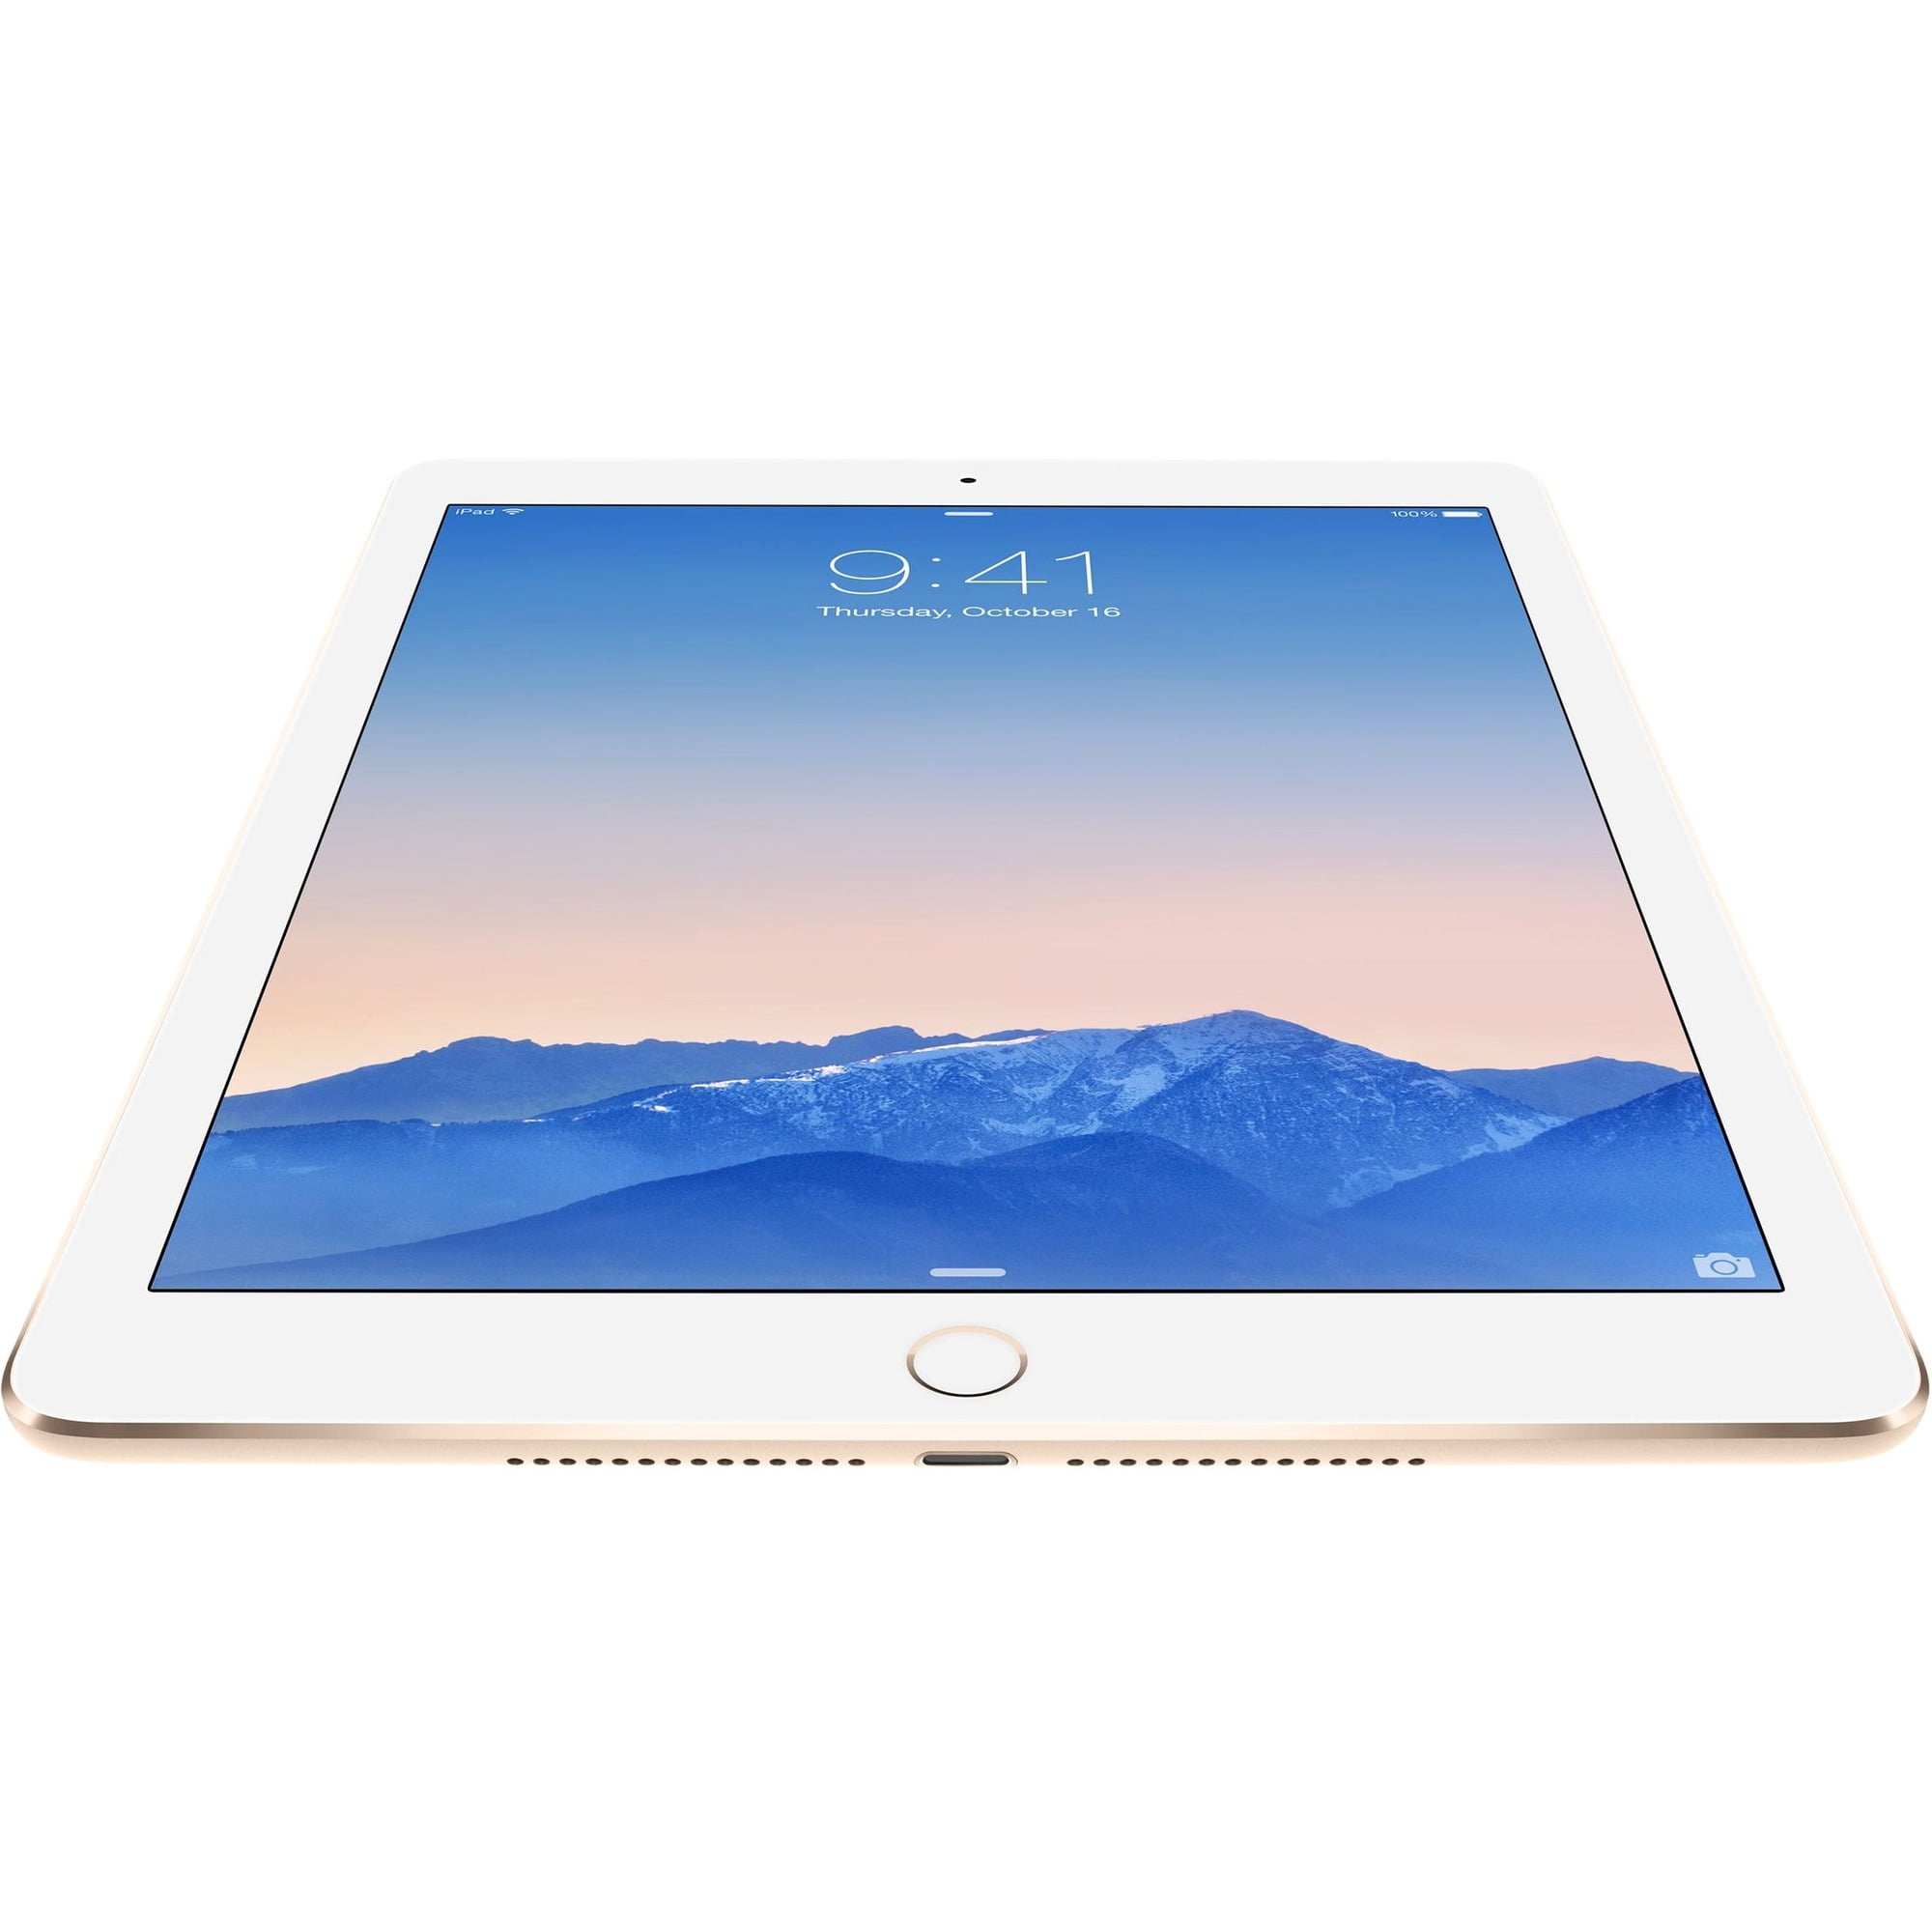 Restored Apple iPad Air 2 128GB WiFi Only Gold (Refurbished 